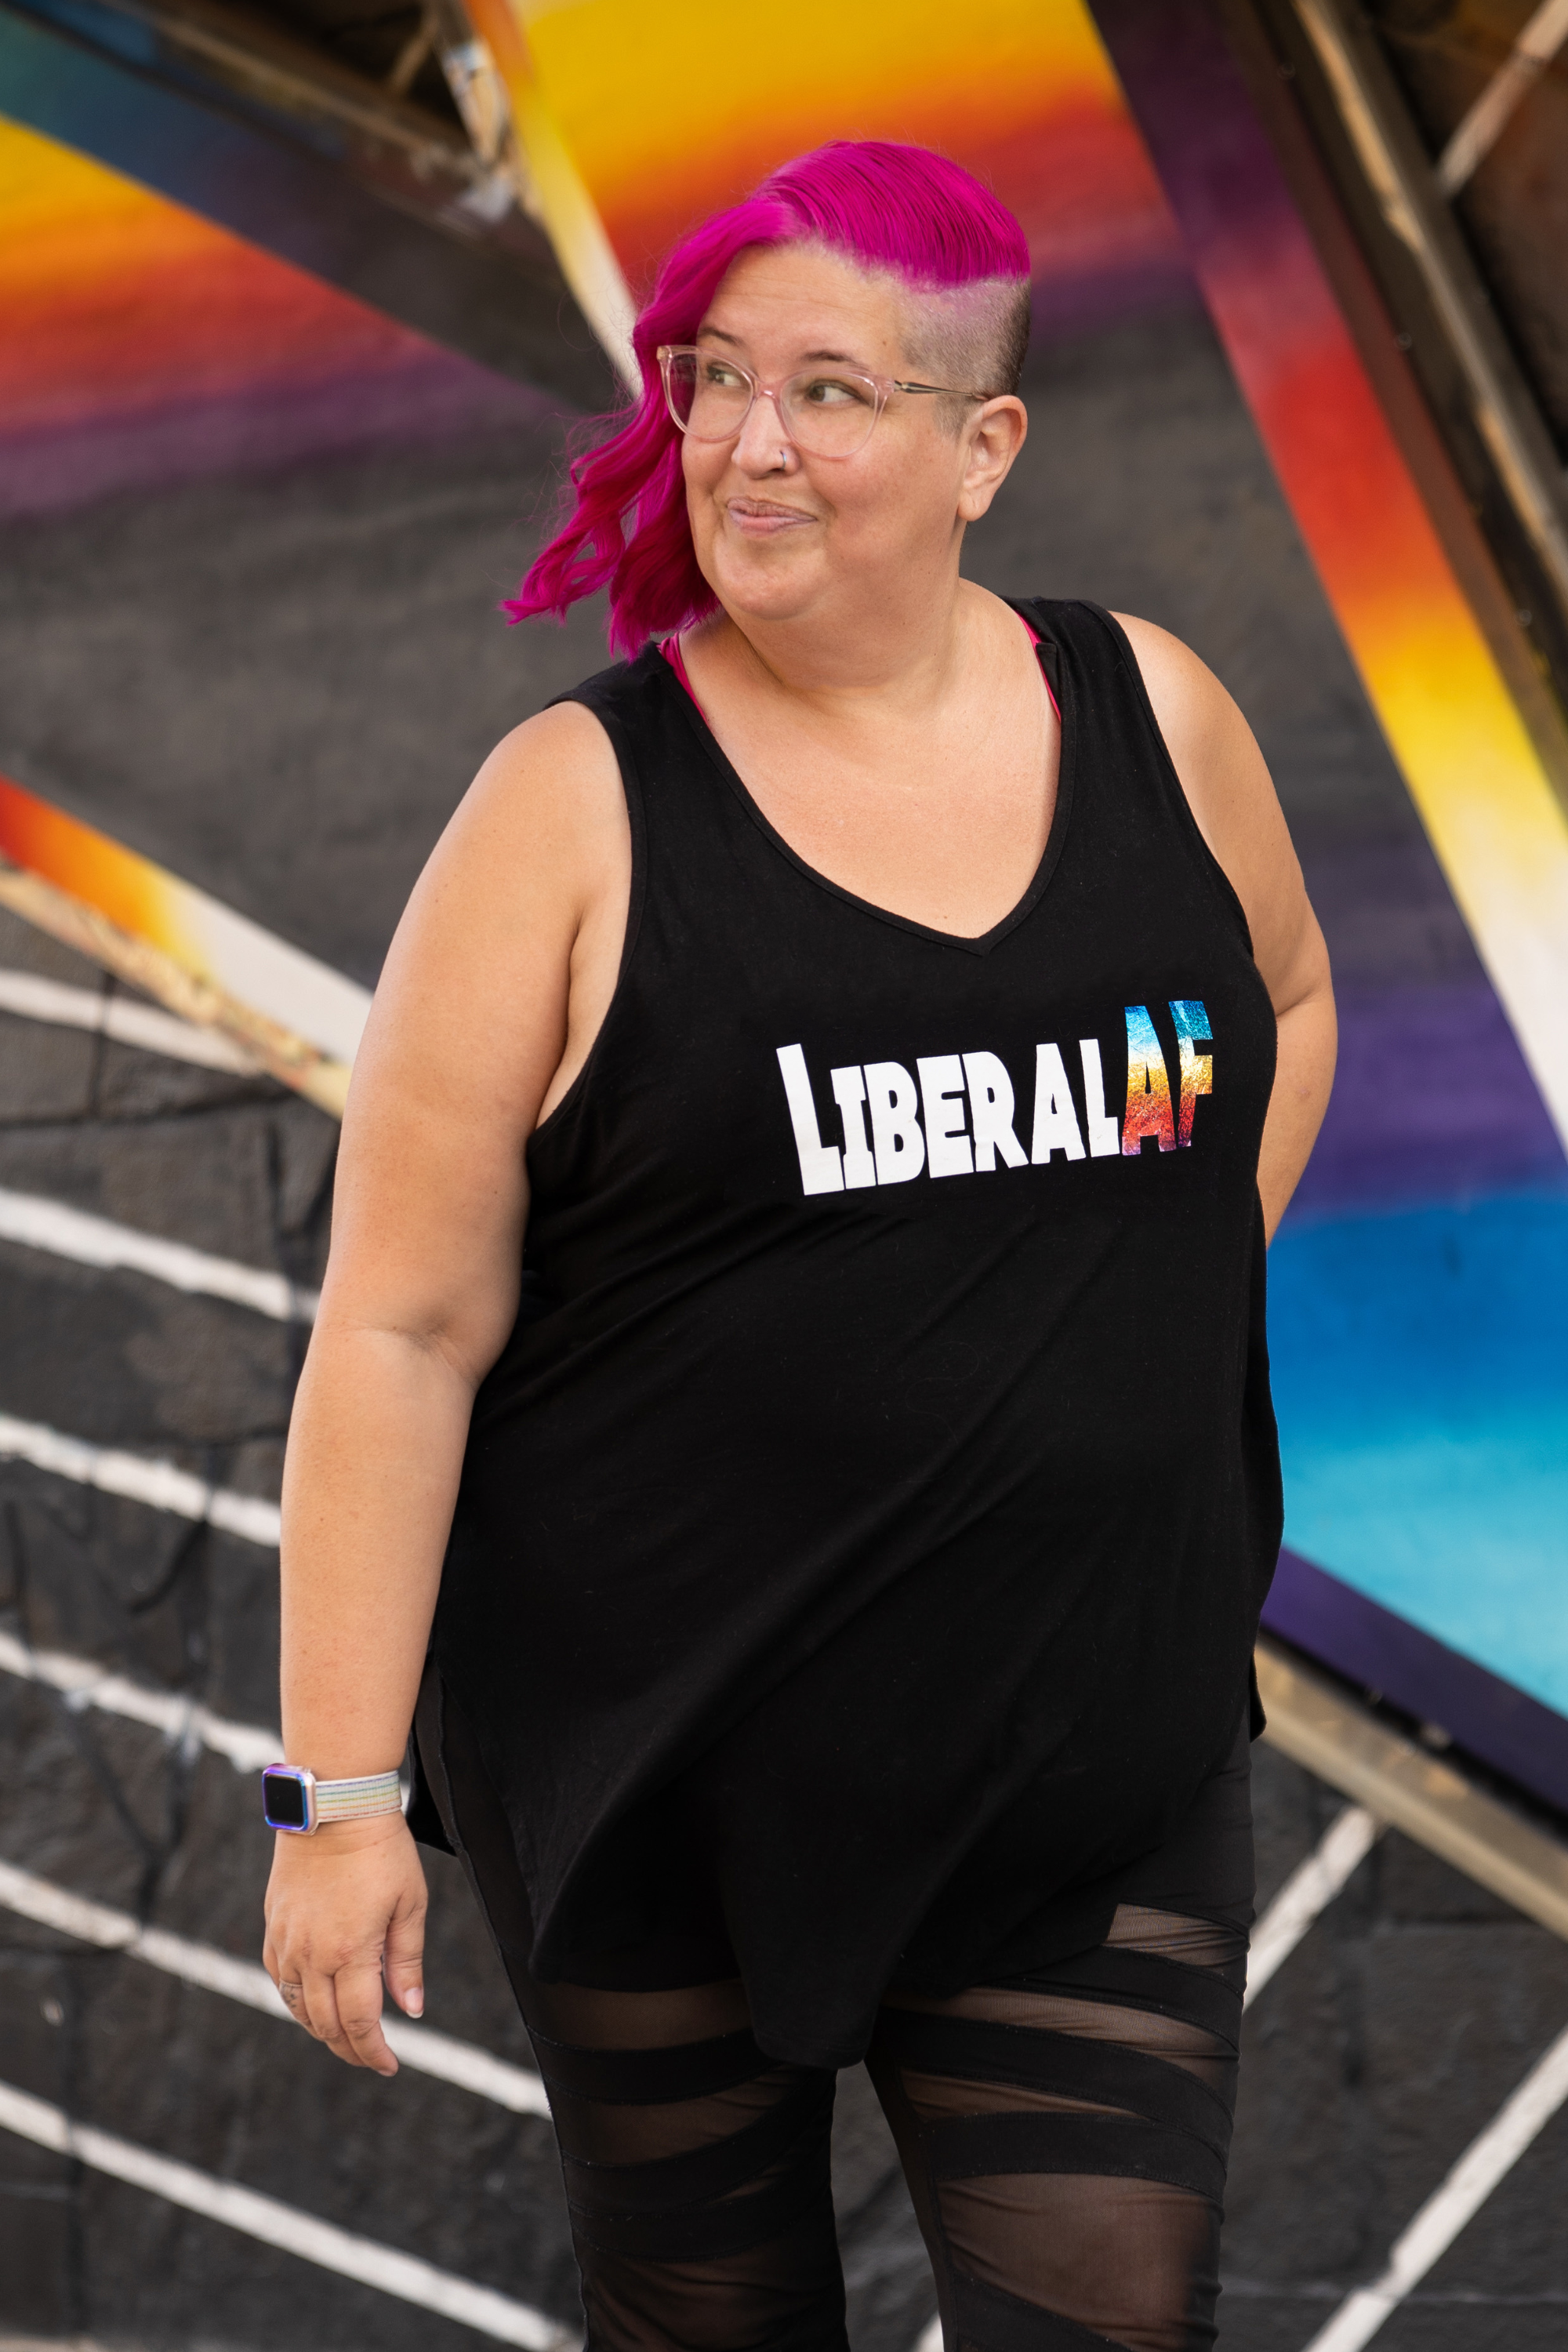 Meg is smirking as she stands in front of an edgy urban wall. She's looking up and to the left. Her hair is pink and undercut. "Liberal AF" is written across her shirt.